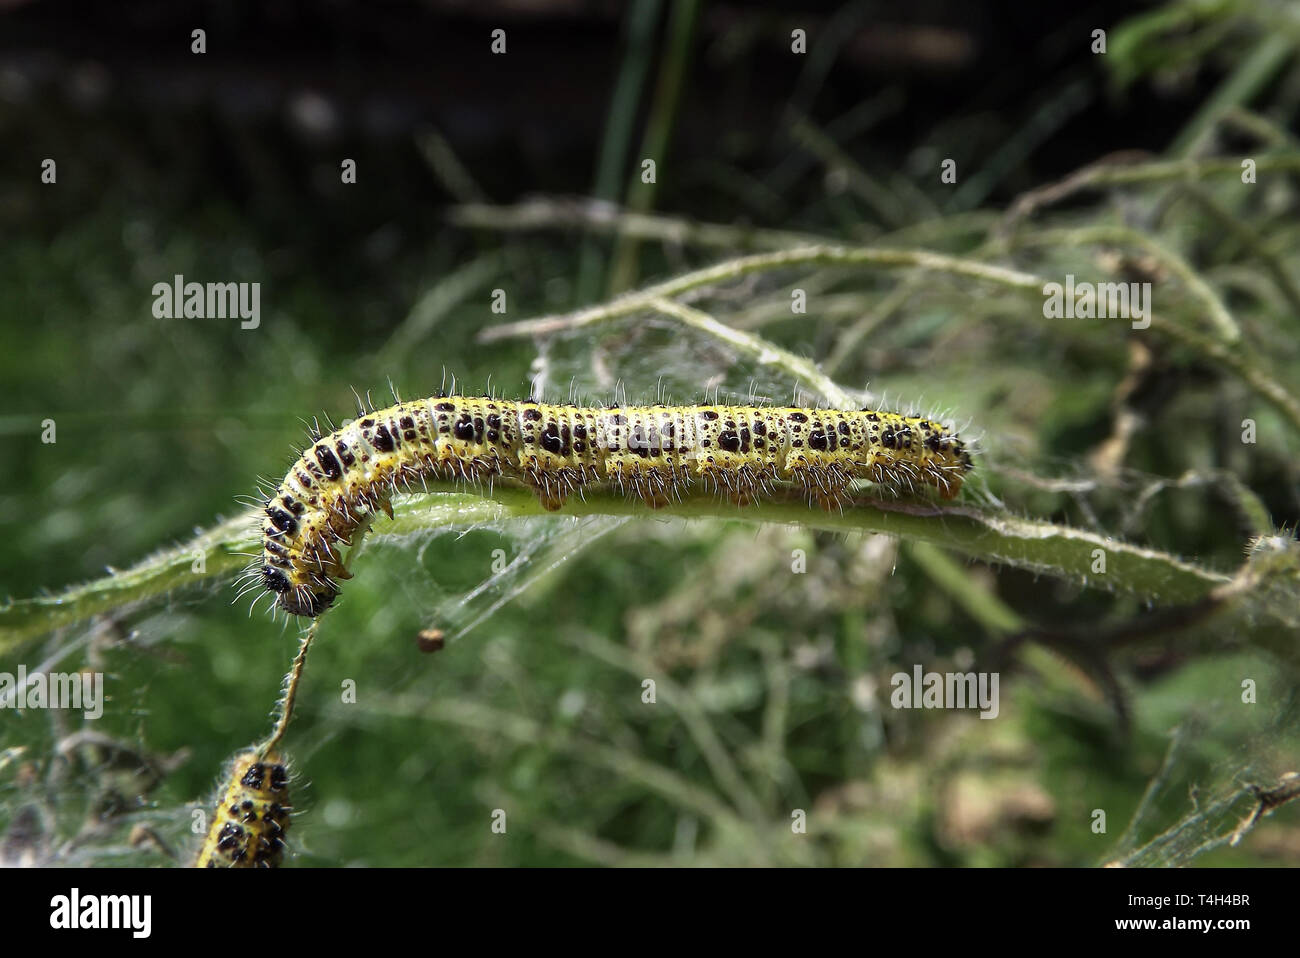 Large white caterpillar feeding on some leaves in a garden Stock Photo